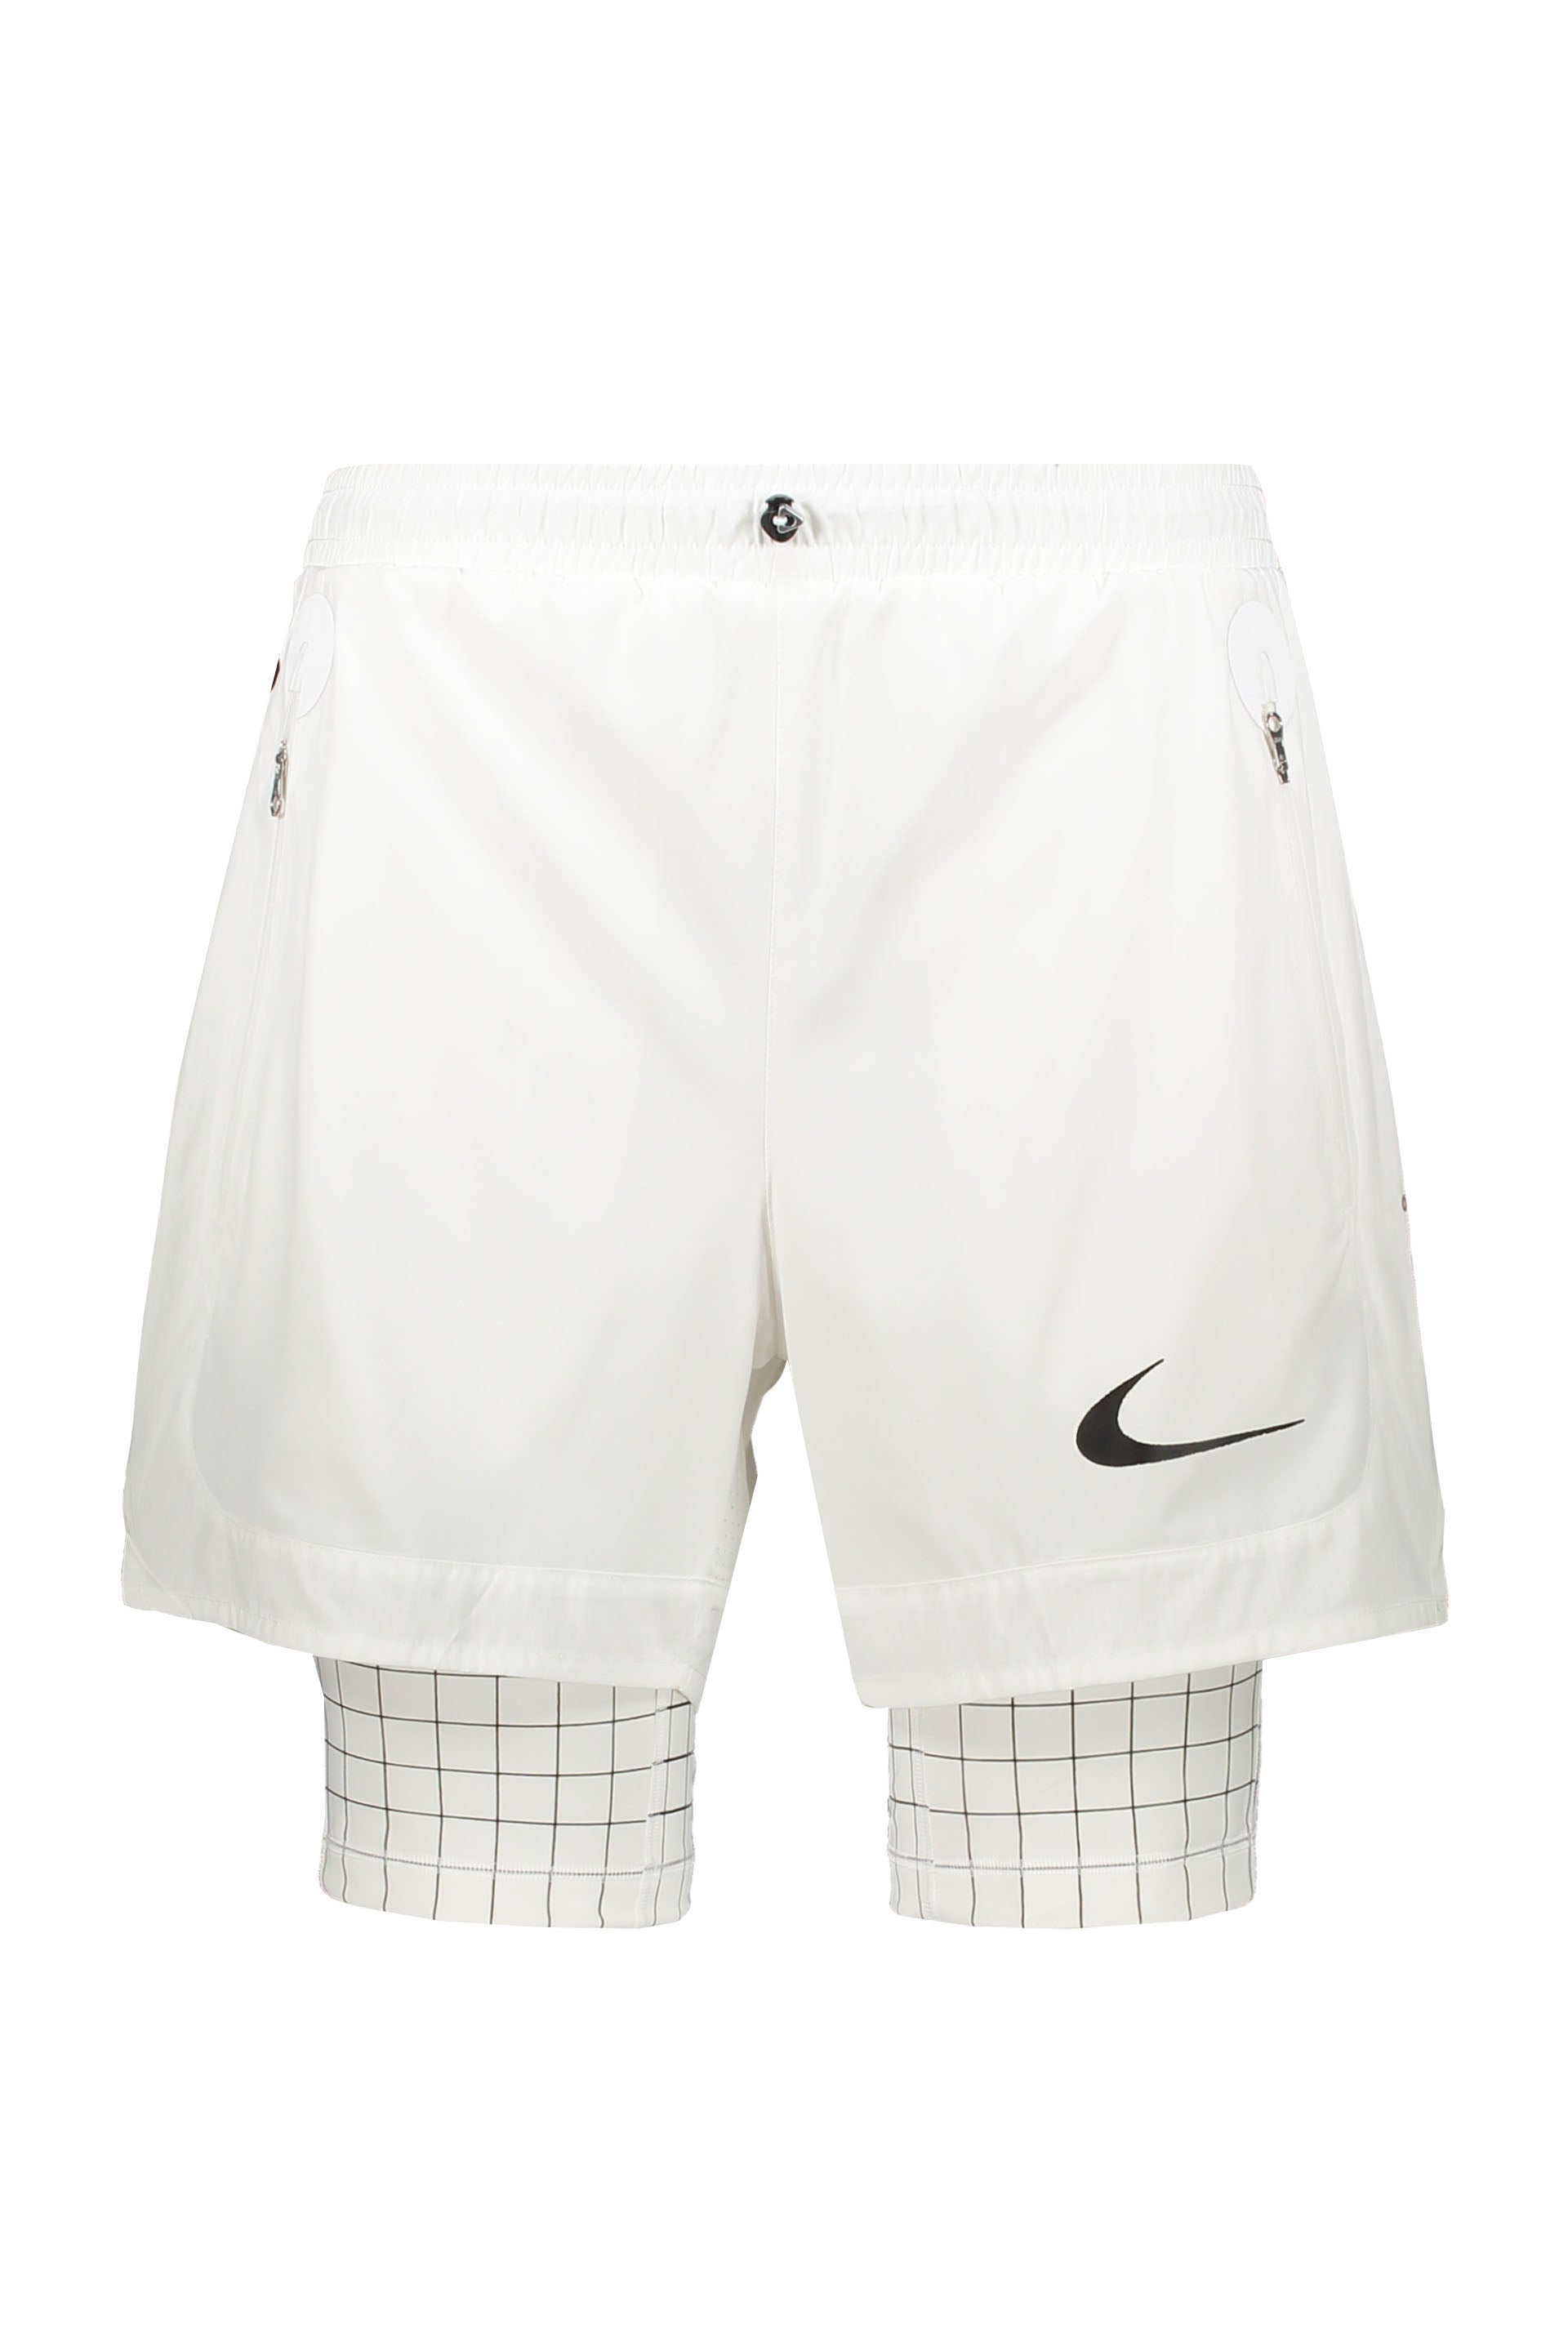 Off-White-OUTLET-SALE-Nike-x-Off-White-Nylon-bermuda-shorts-Hosen-XS-ARCHIVE-COLLECTION.jpg